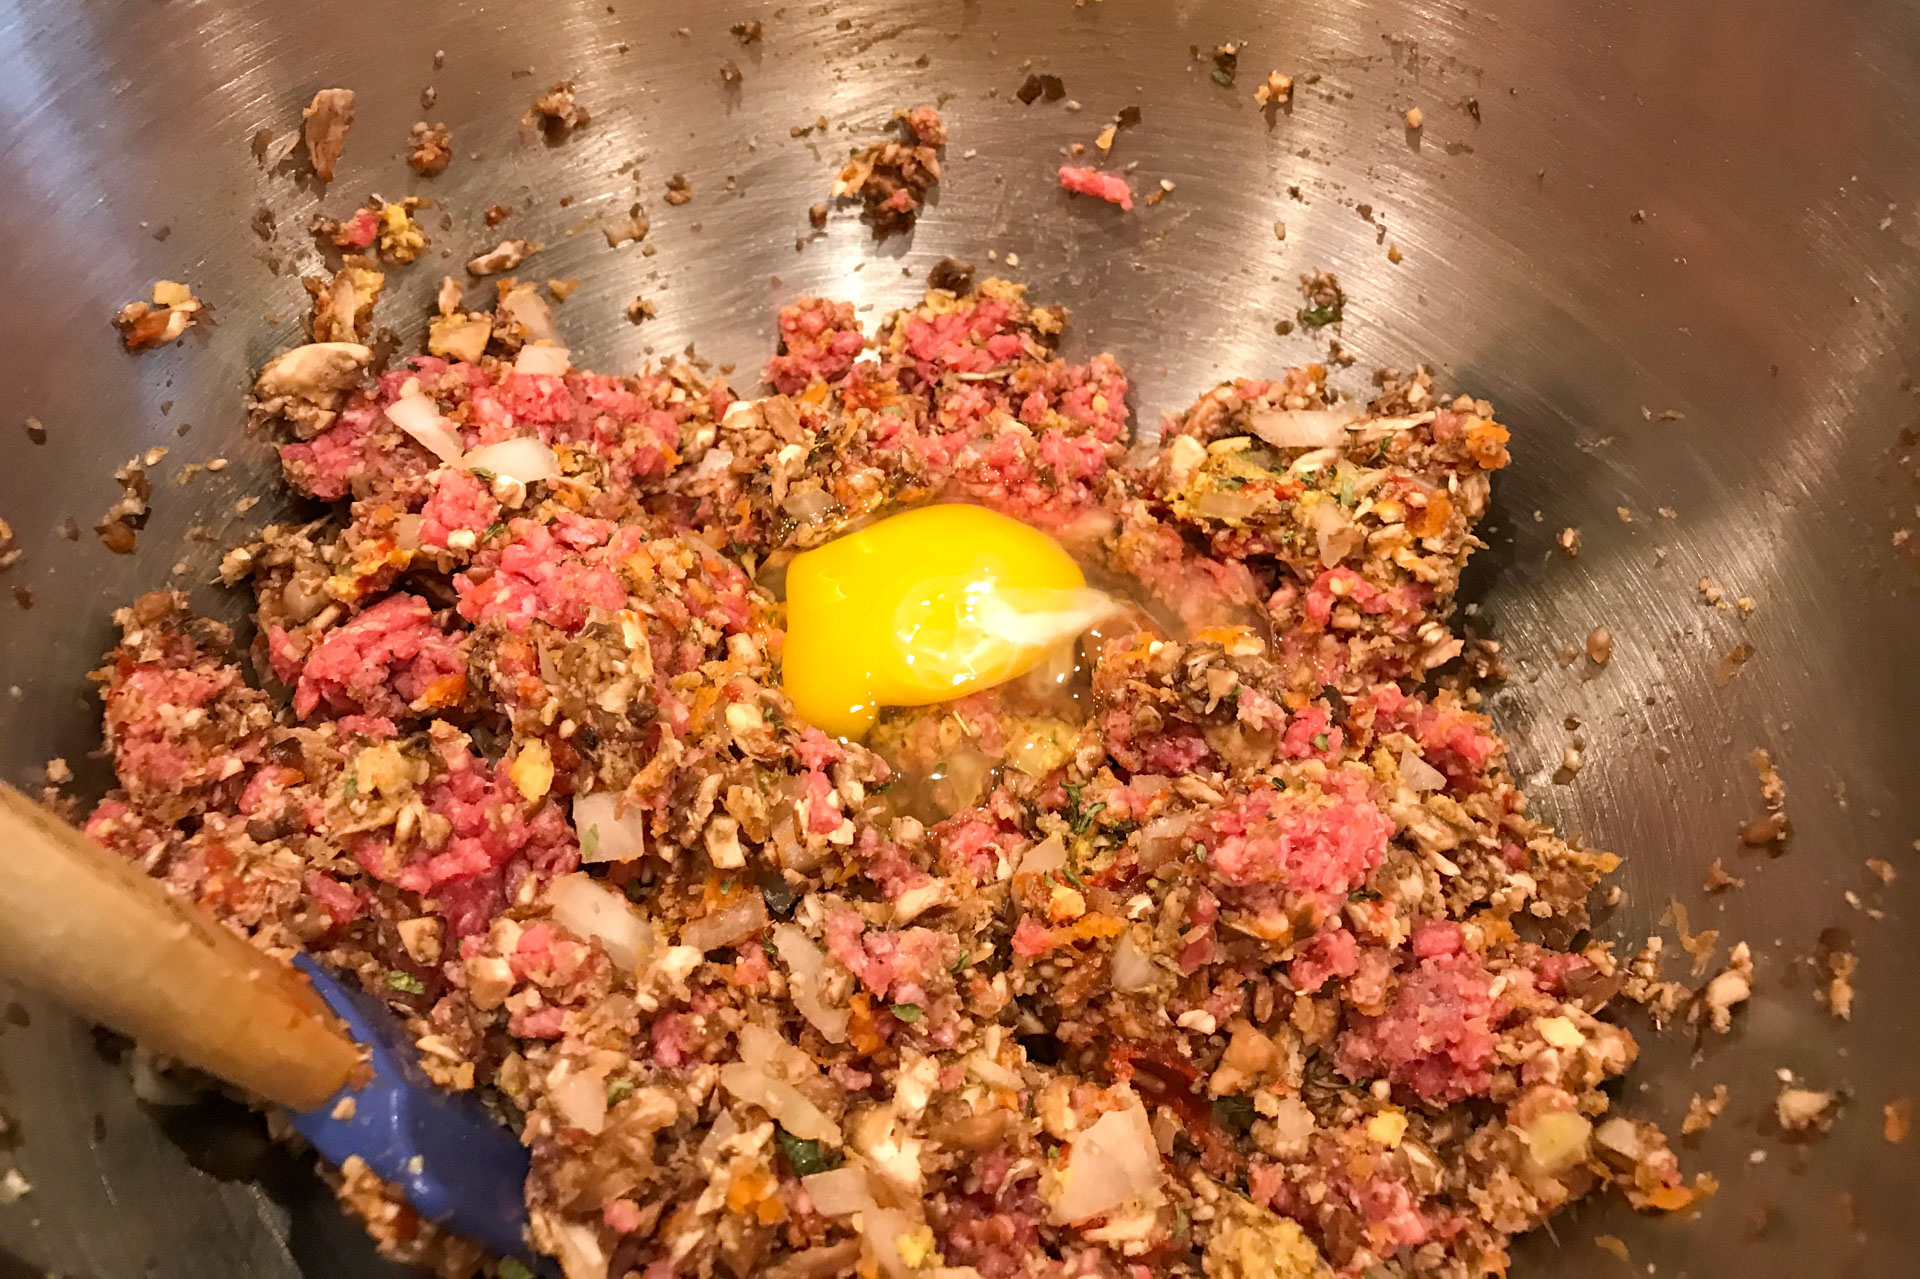 meatloaf mixture: raw egg on top of ground meat and vegetable mixture in a stainless steel mixing bowl